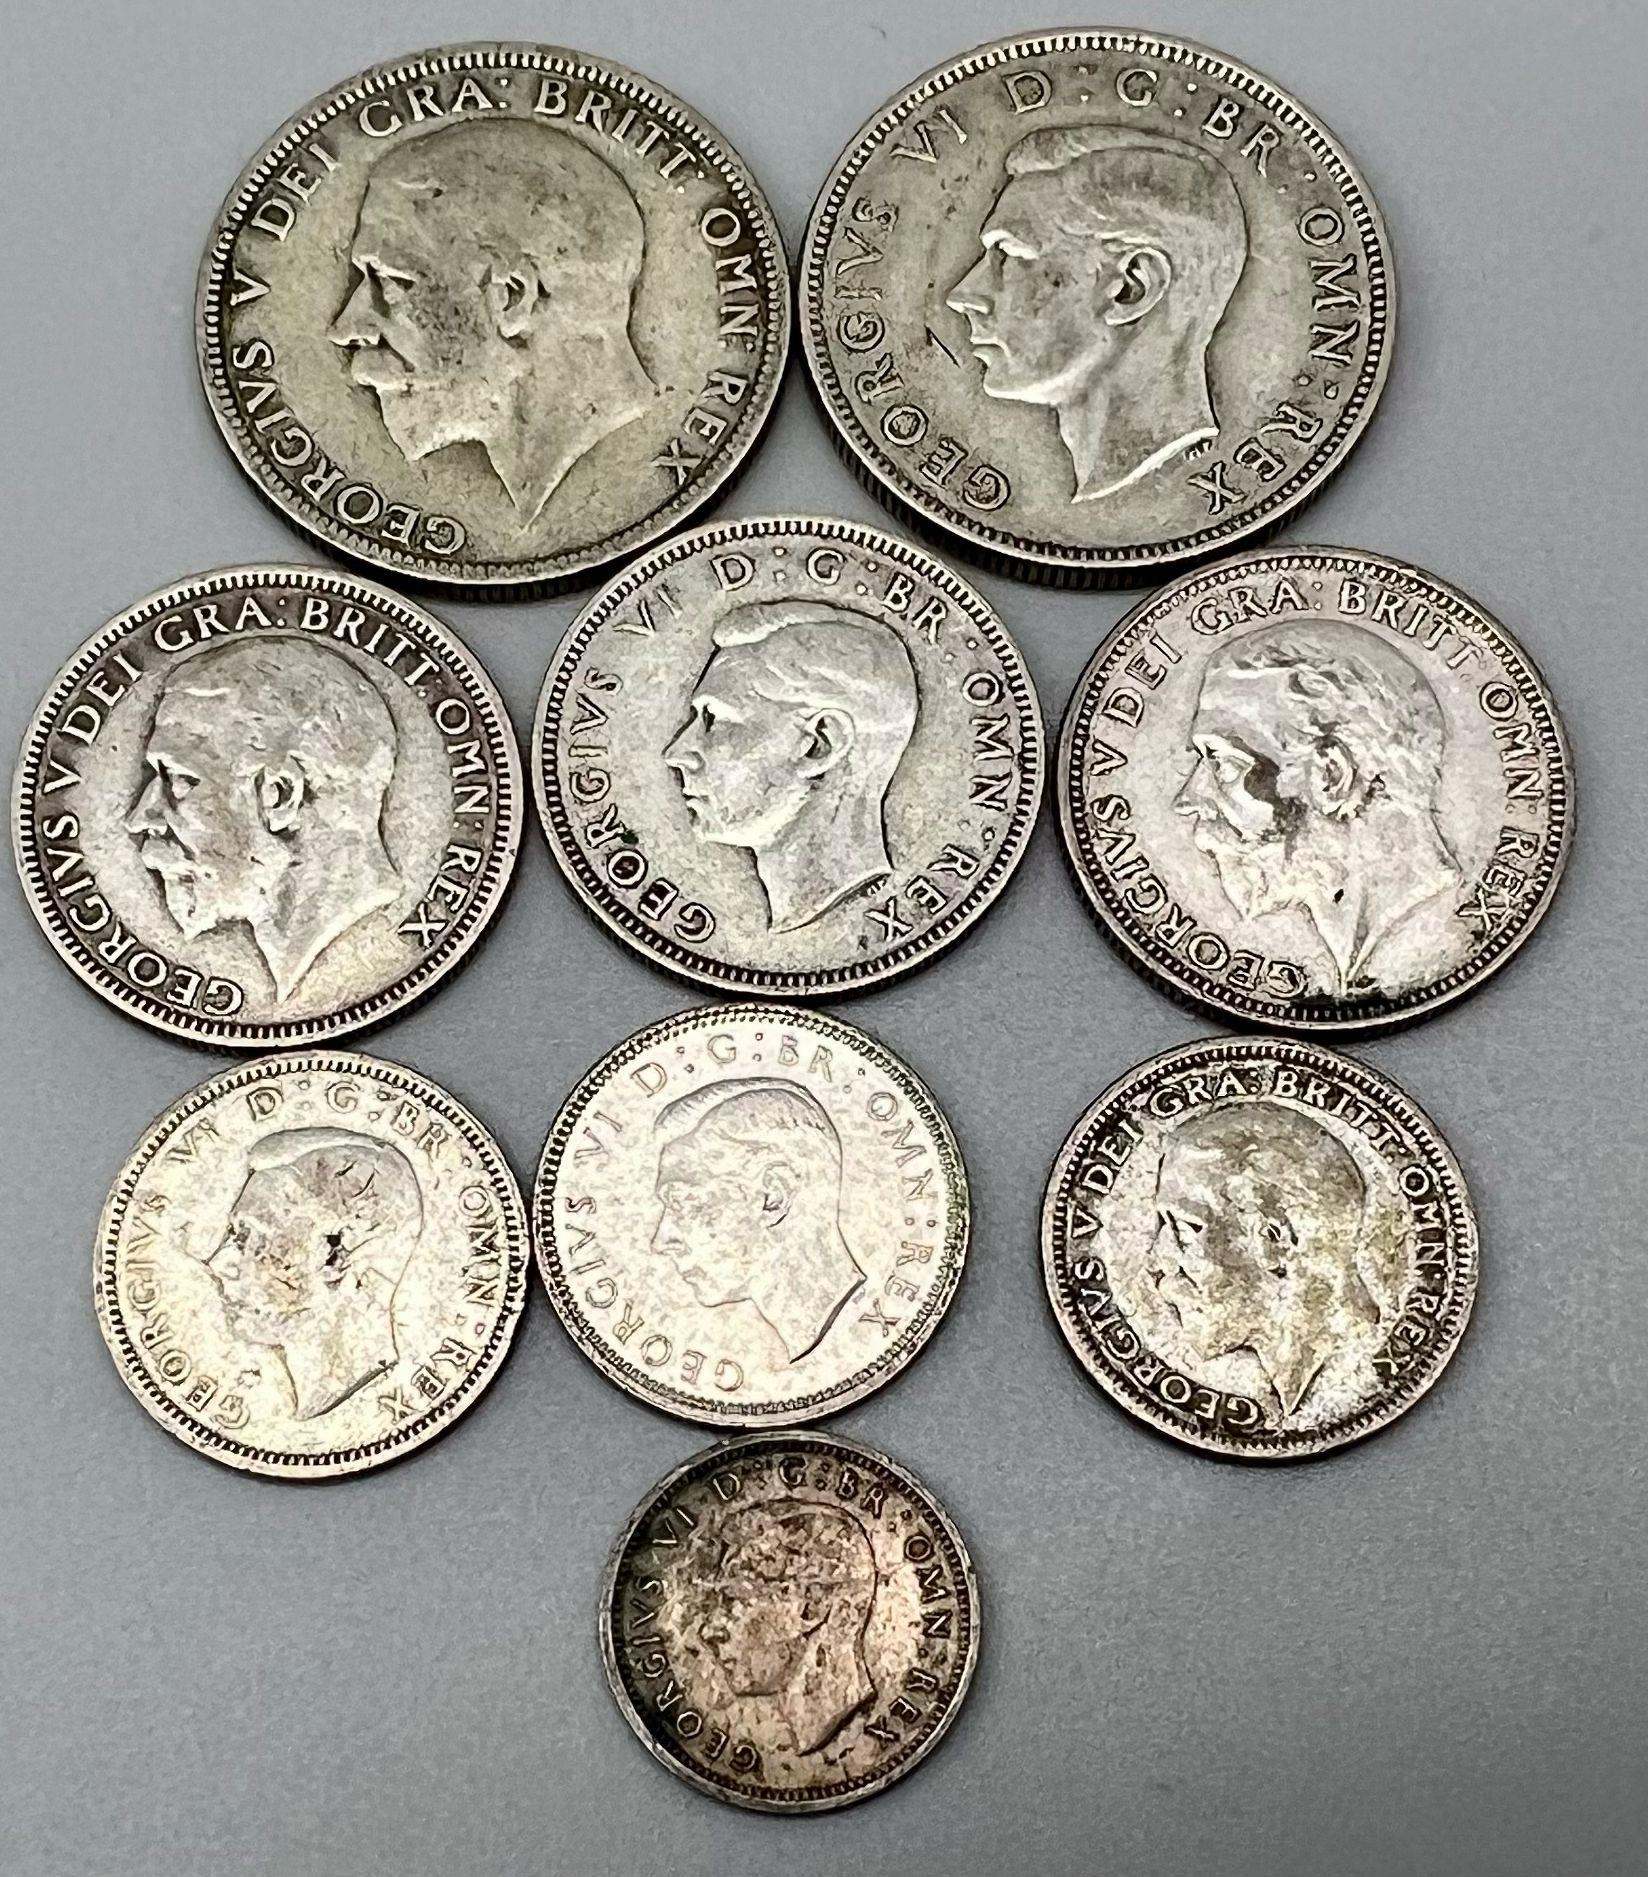 SELECTION OF 9 COINS, 3 X 1 SHILLING 1926, 1935, 1946 & 3 X 6 PENCE 1927, 1938, 1944 & 1937 3 PENCE,